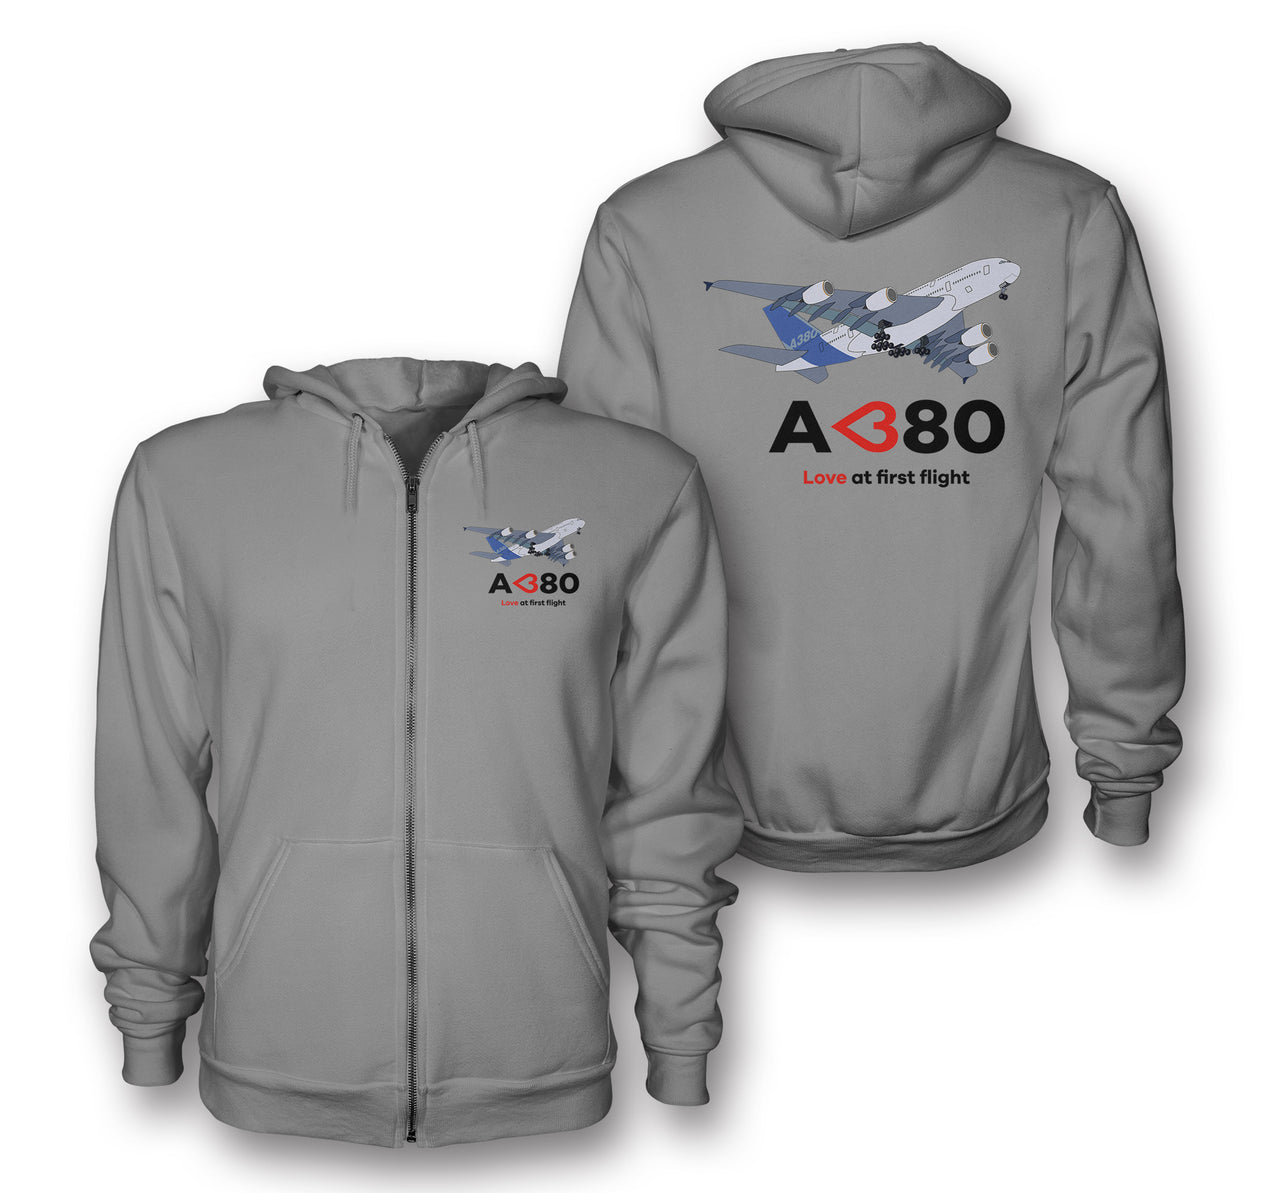 Airbus A380 Love at first flight Designed Zipped Hoodies